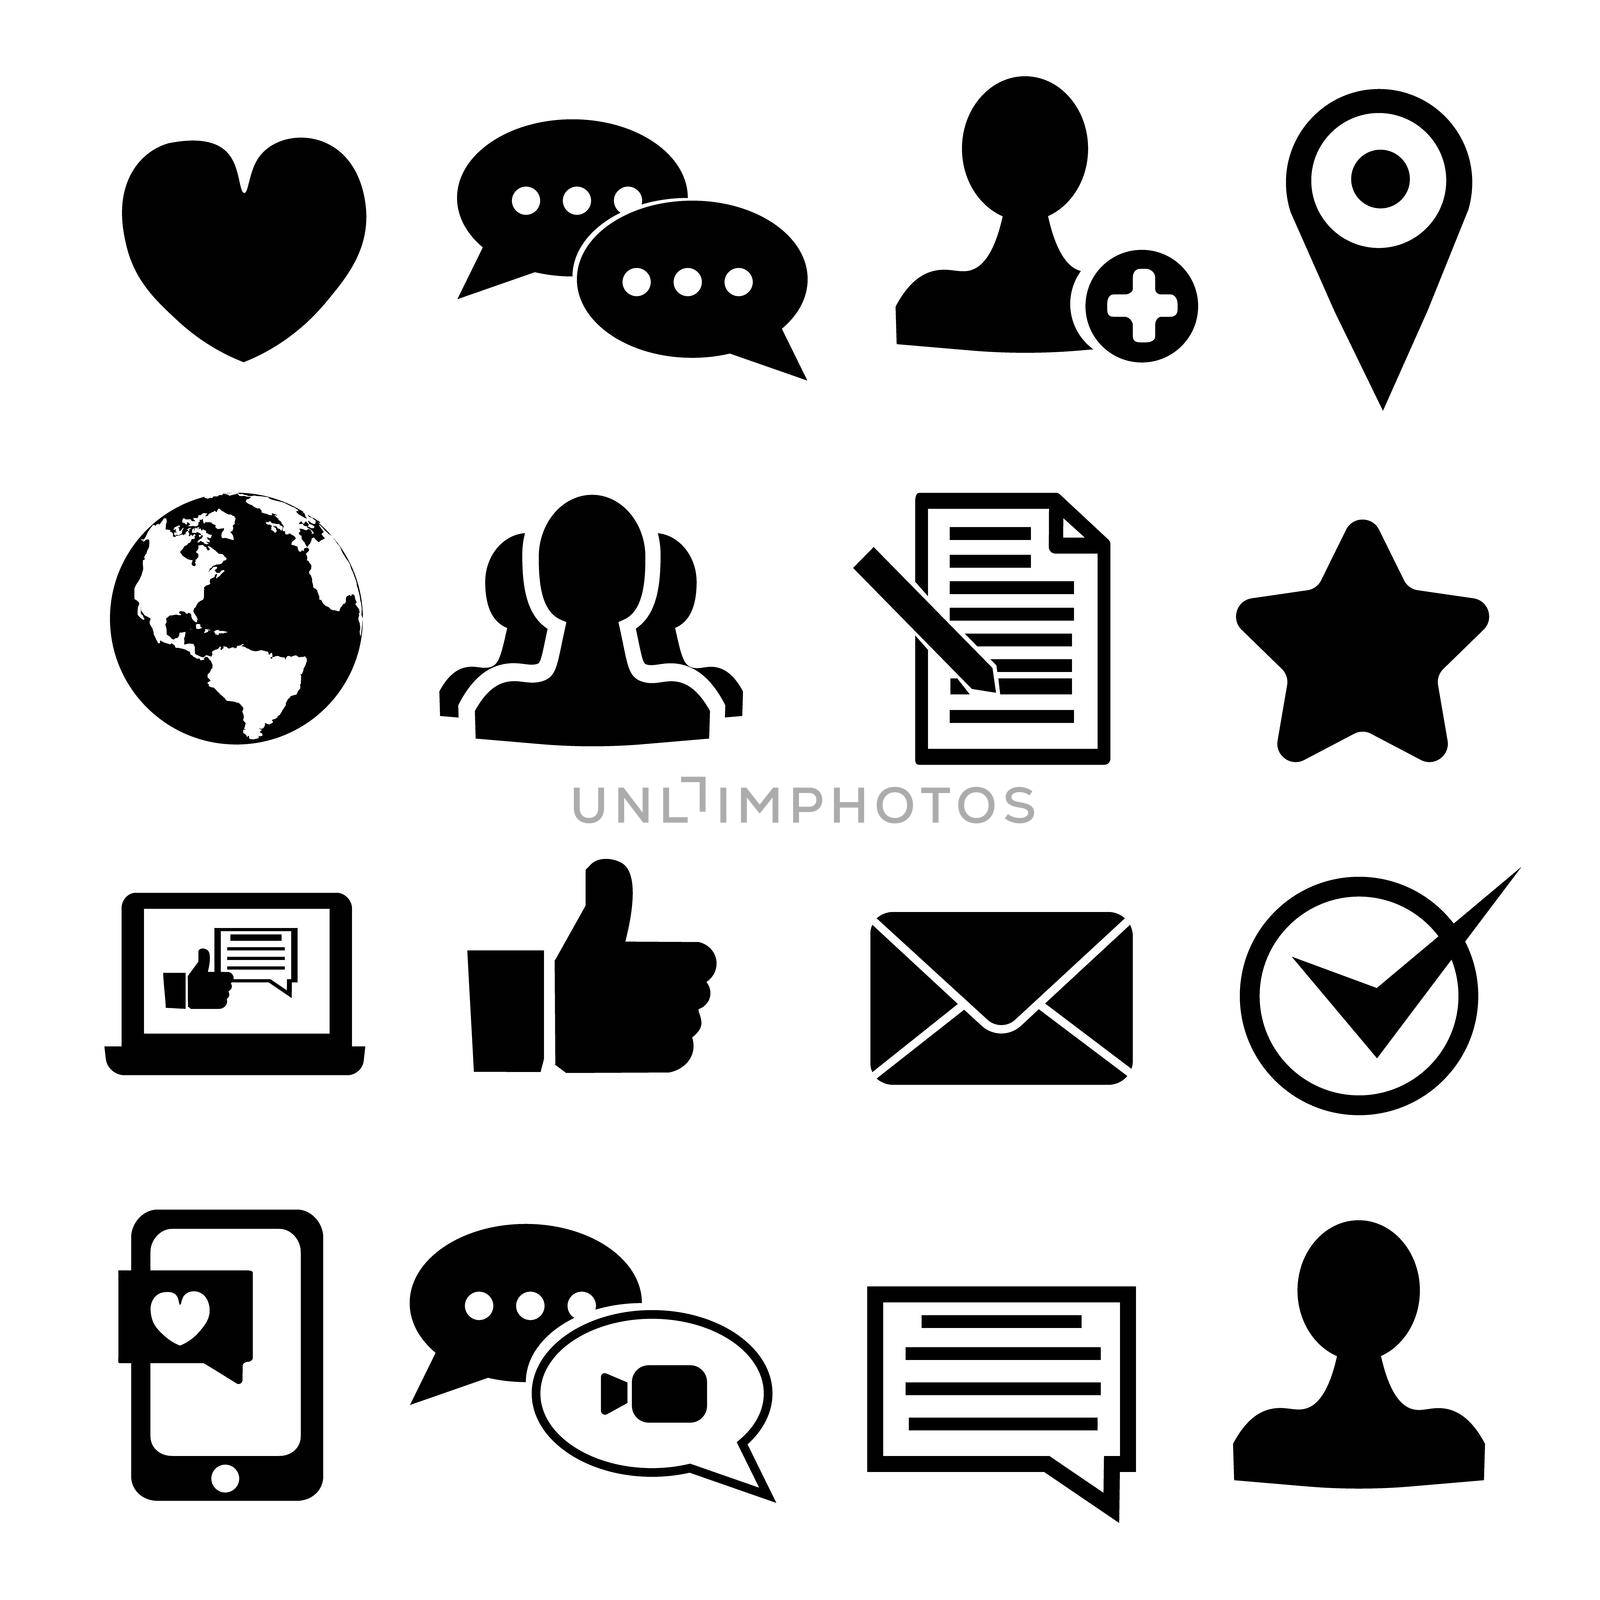 Media and communication icons by Alxyzt